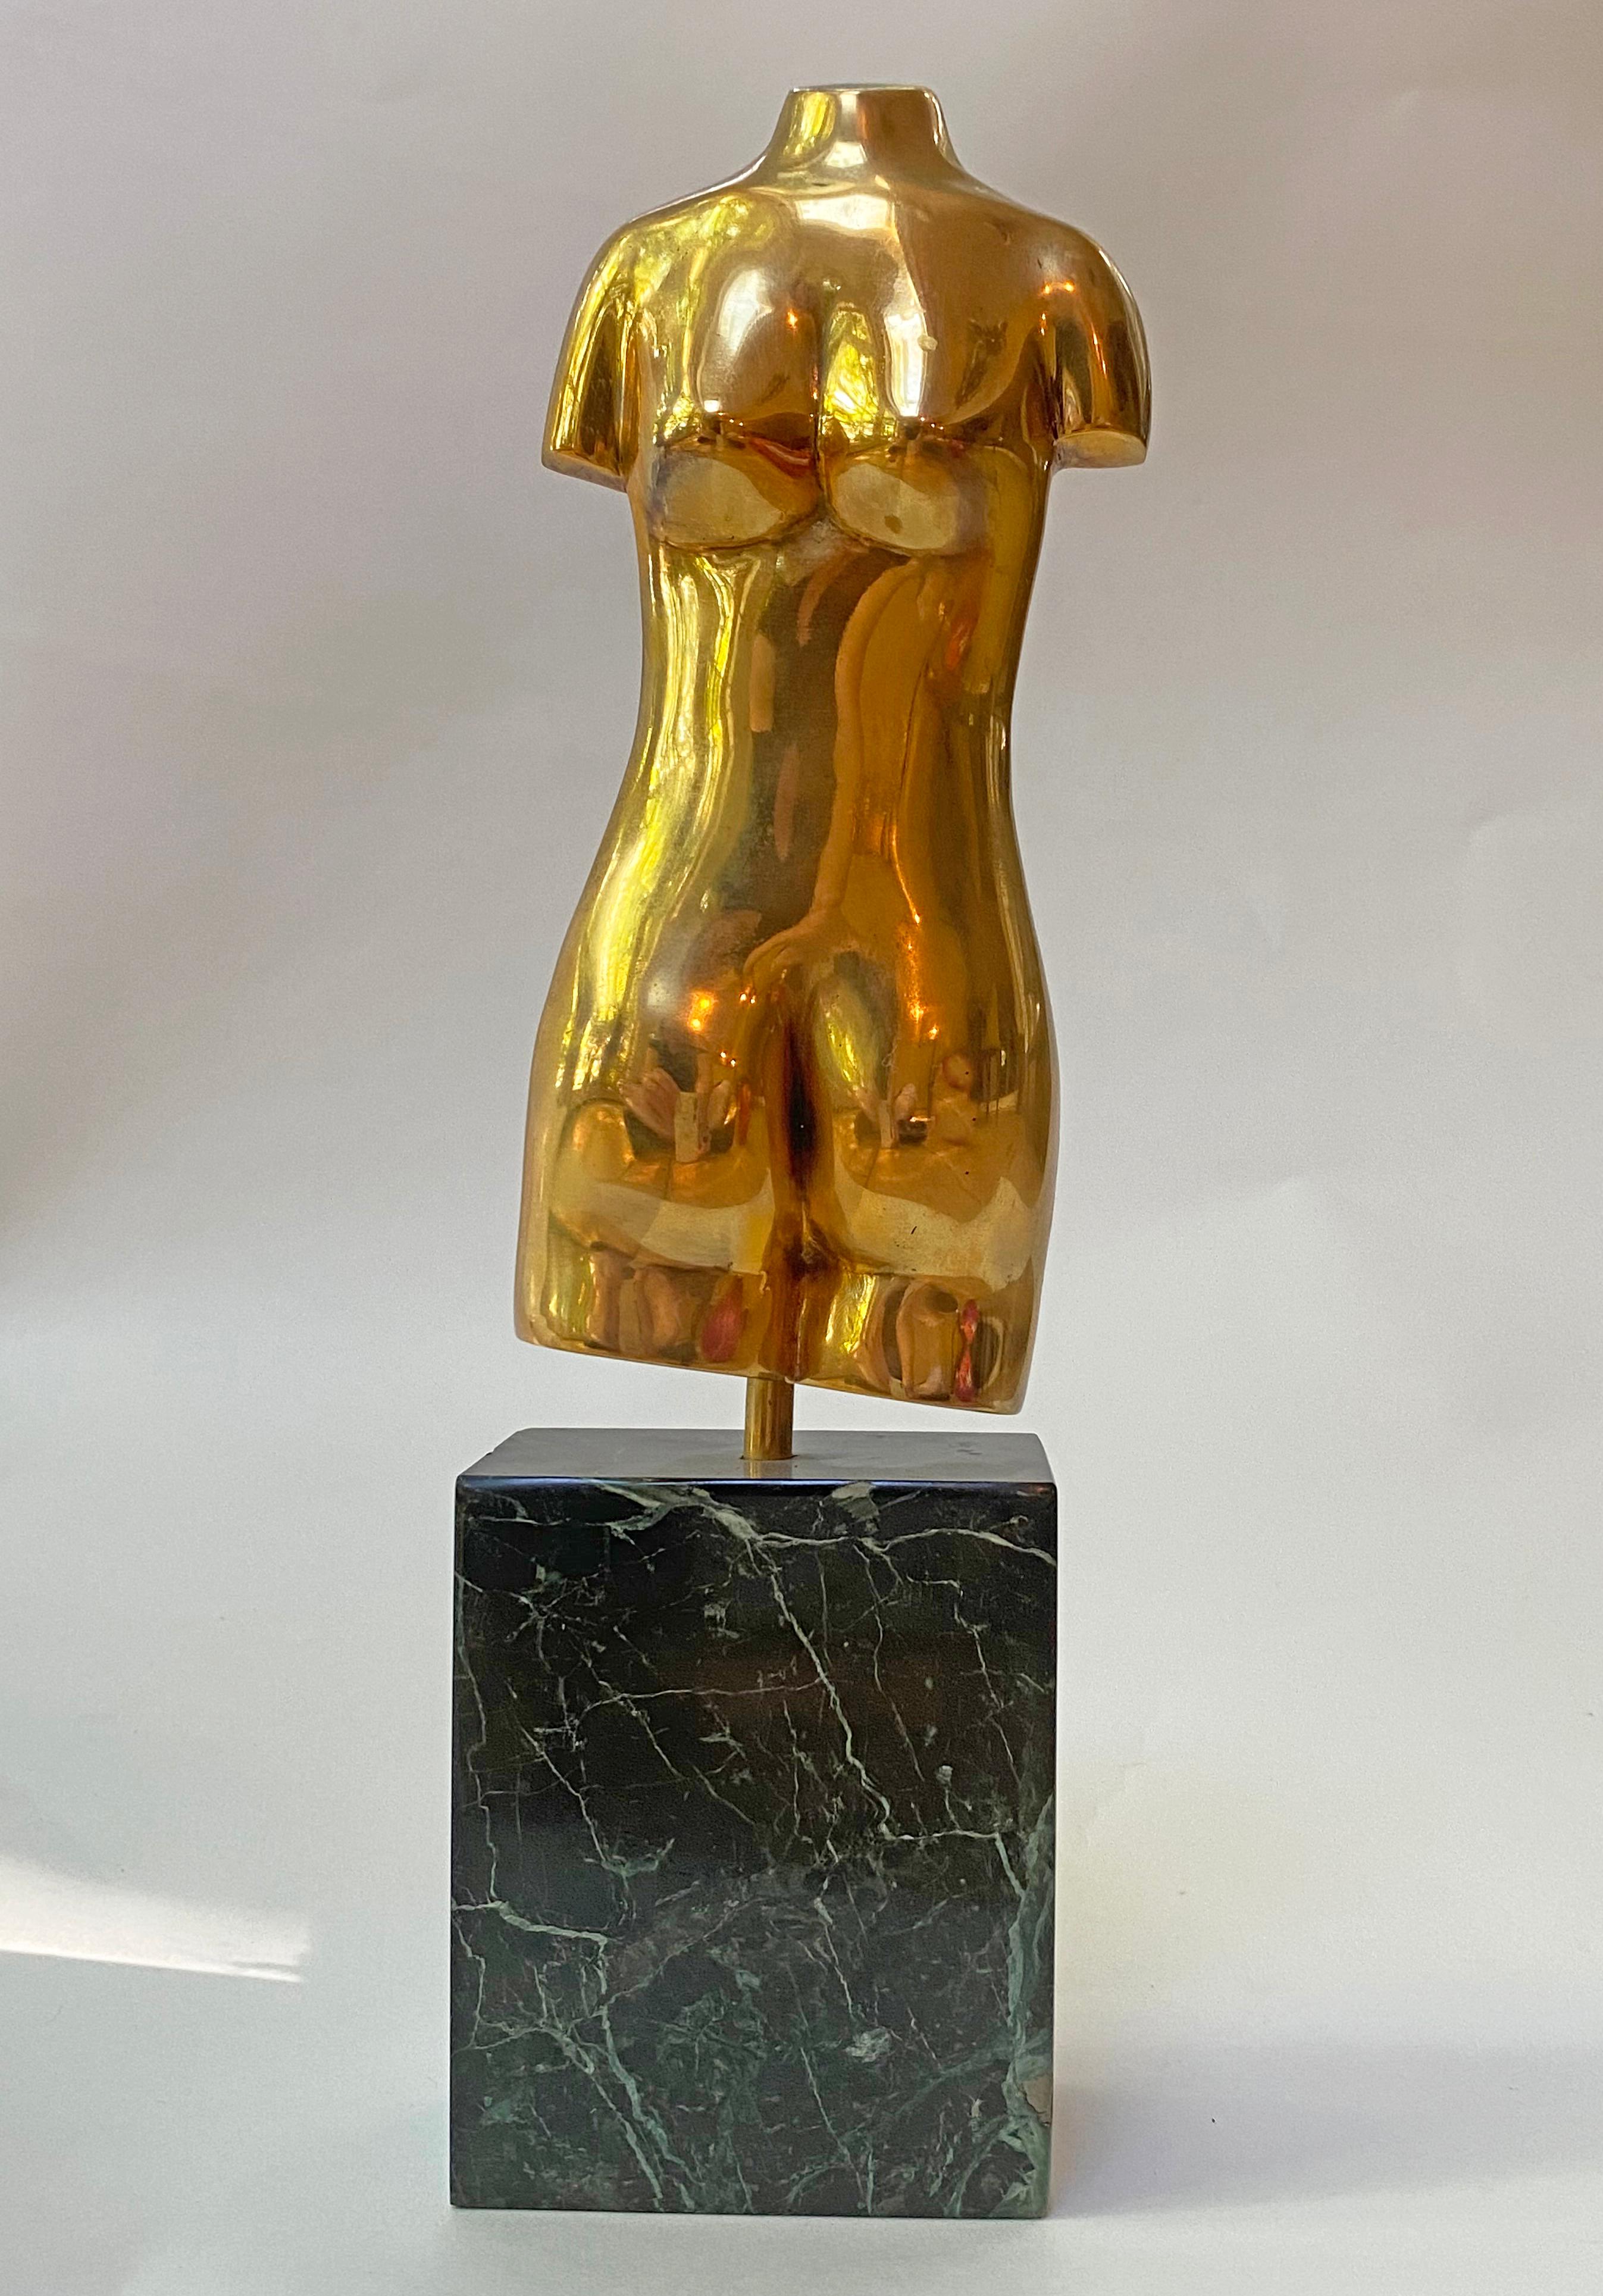 American Brass Figural Sculpture by Henry Corwin